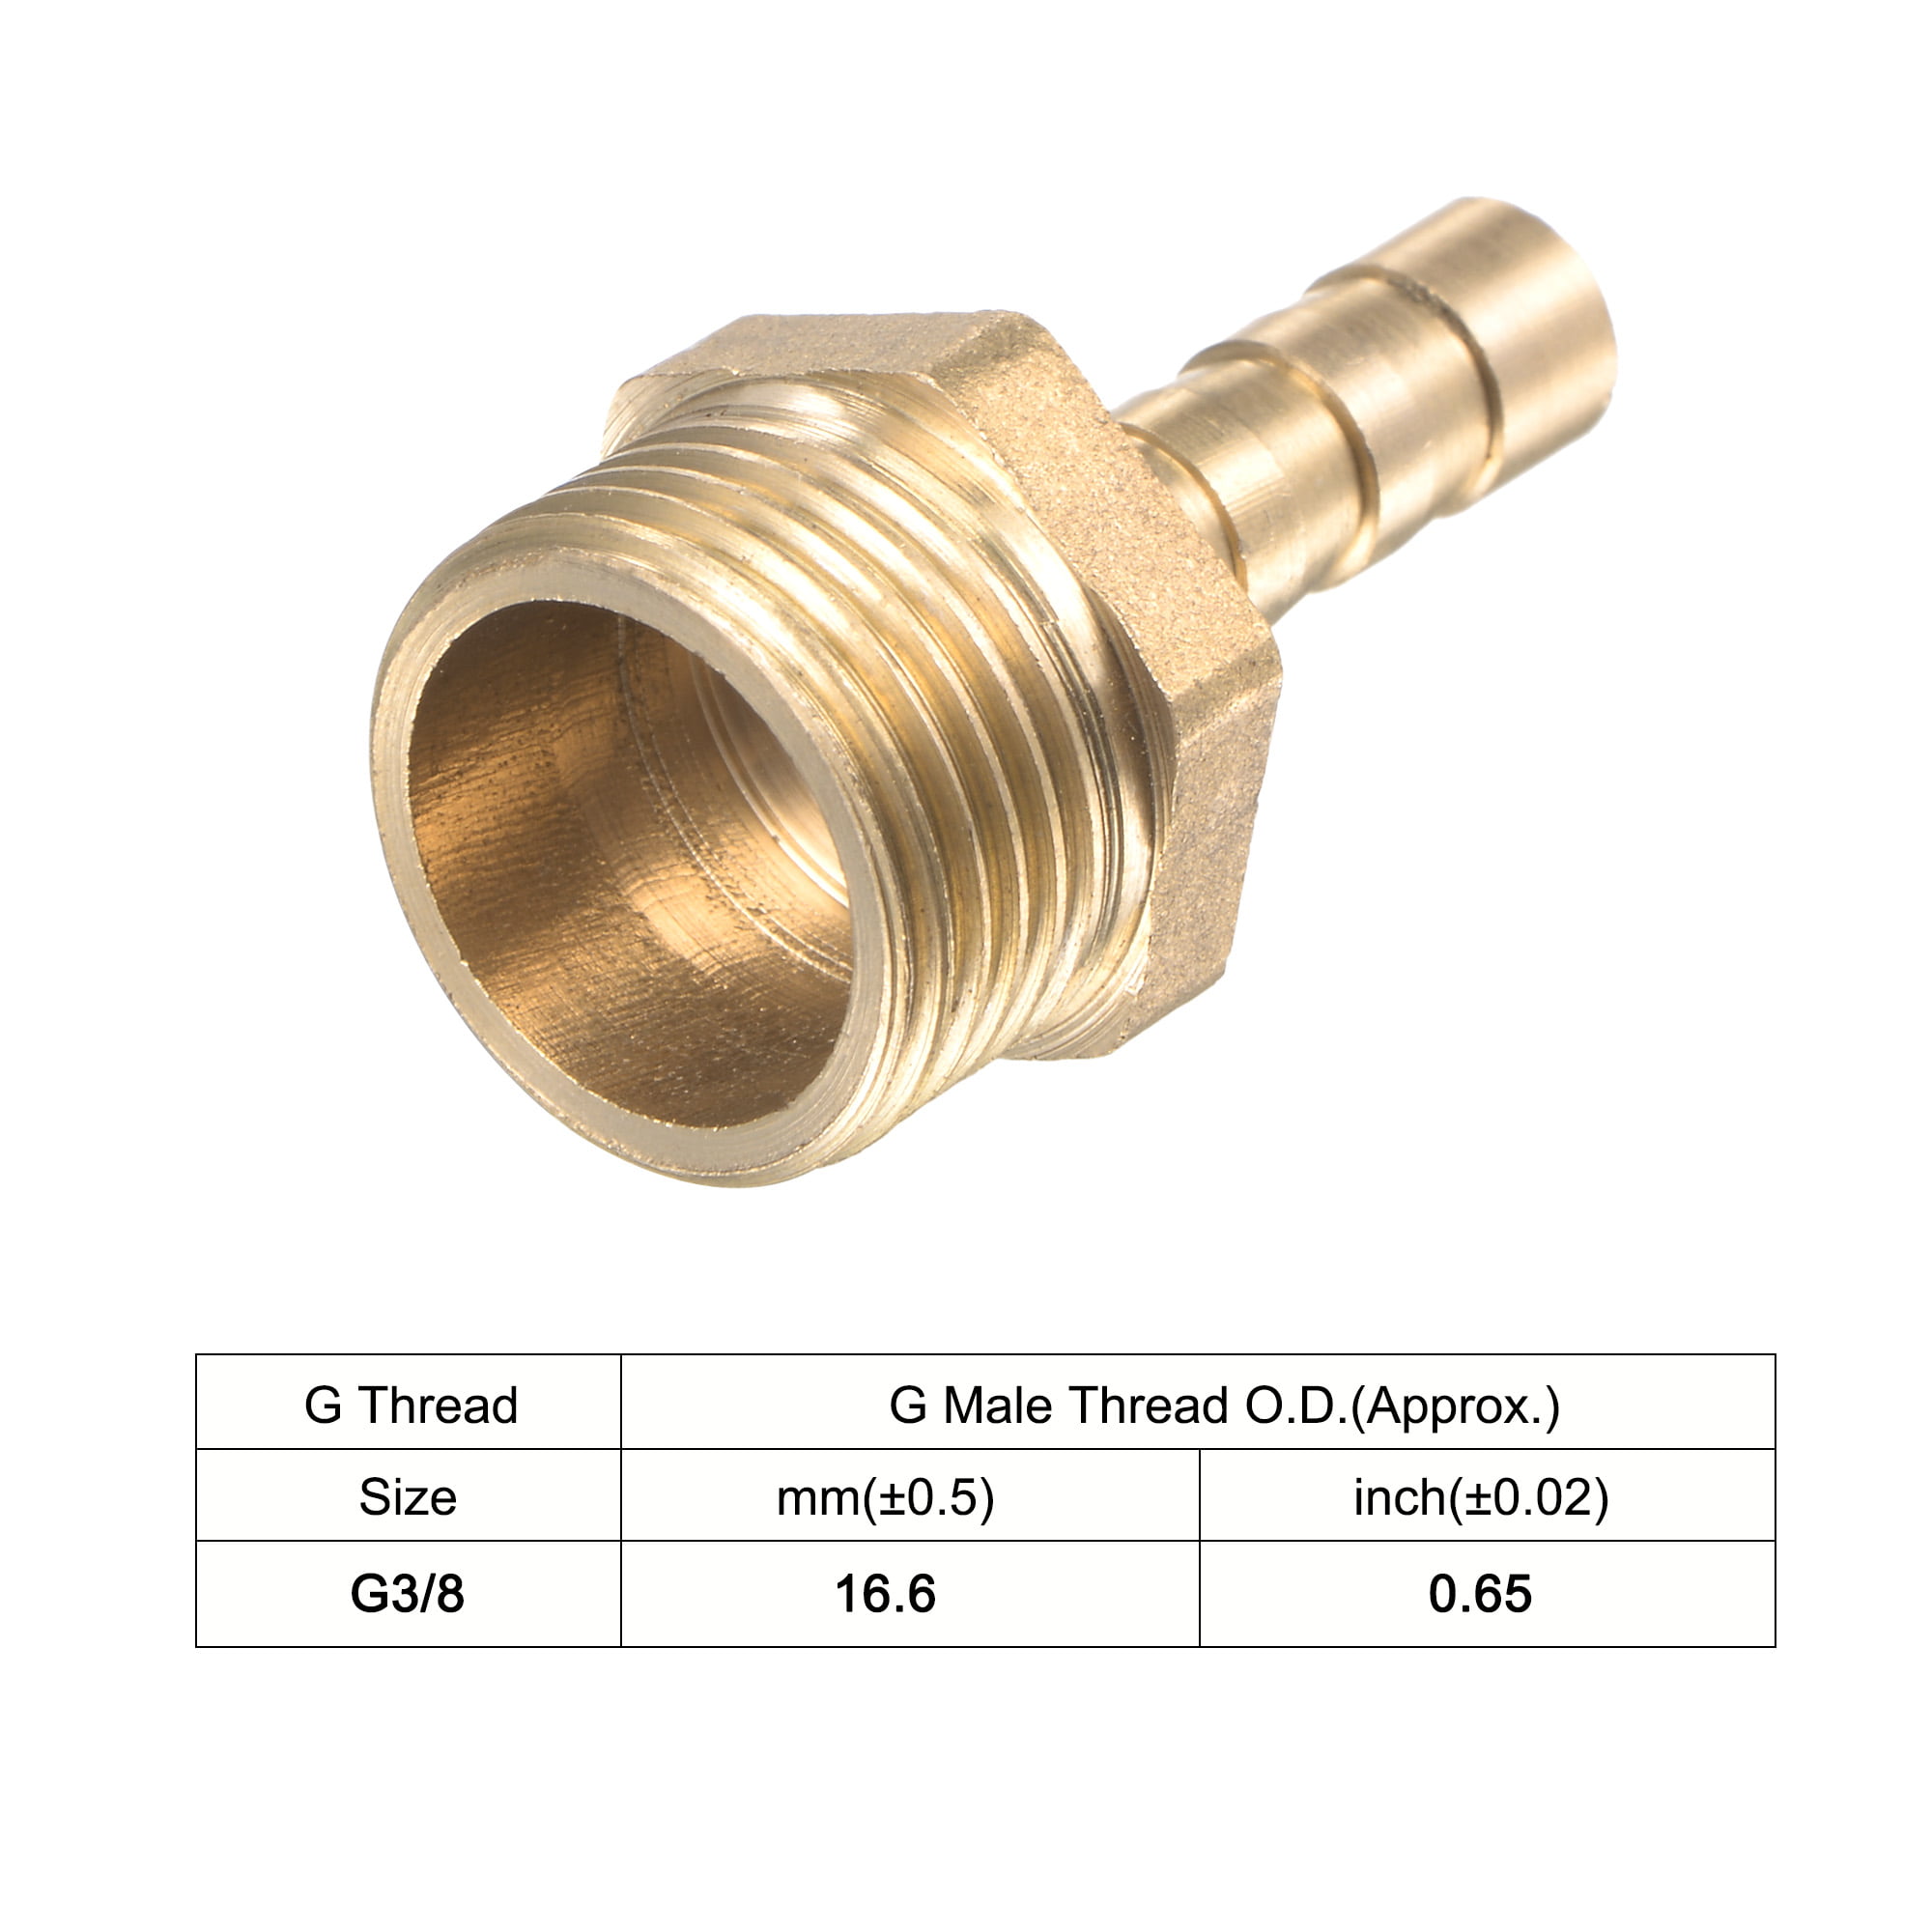 Brass female hosetails choose thread and hose size 3/8" and 1/2" bsp range 